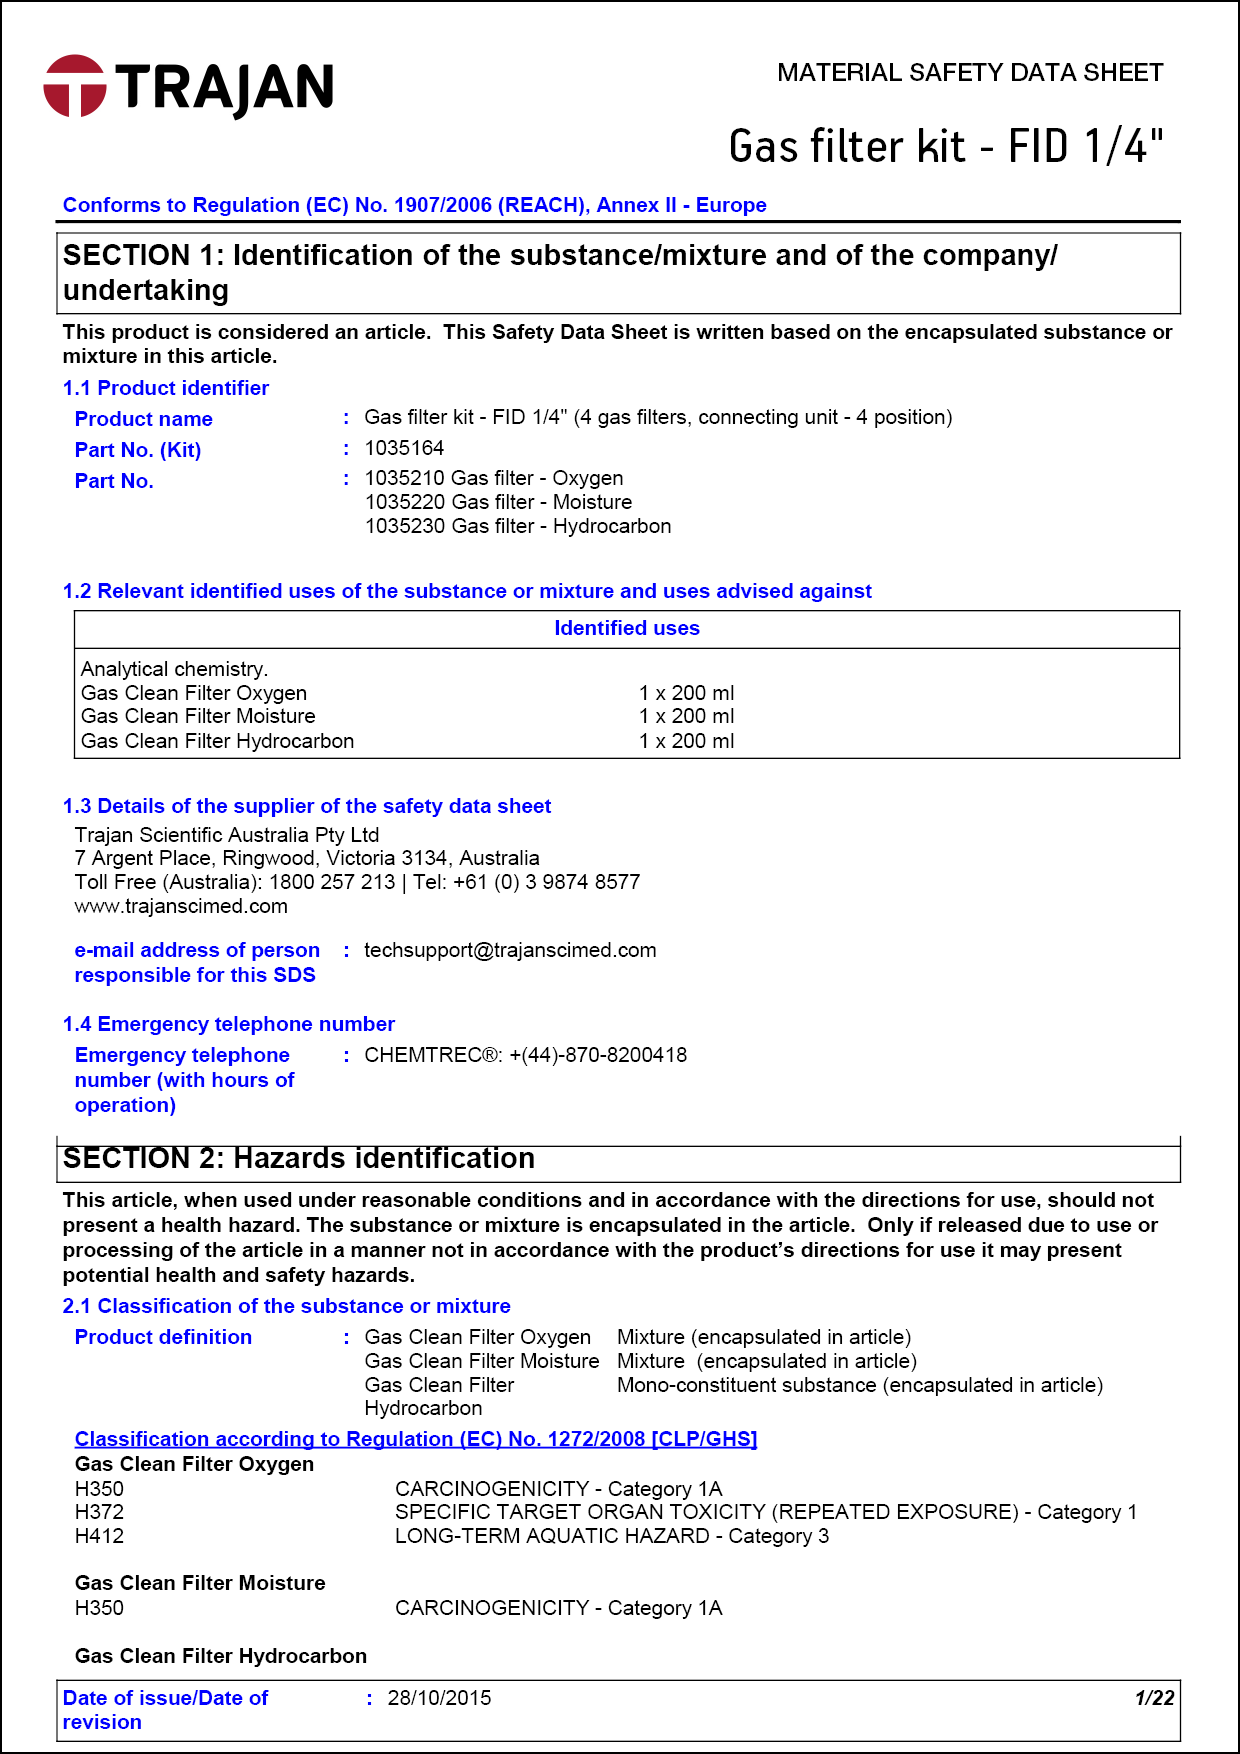 Material safety data sheet - Gas filter kits - FID 1/4"